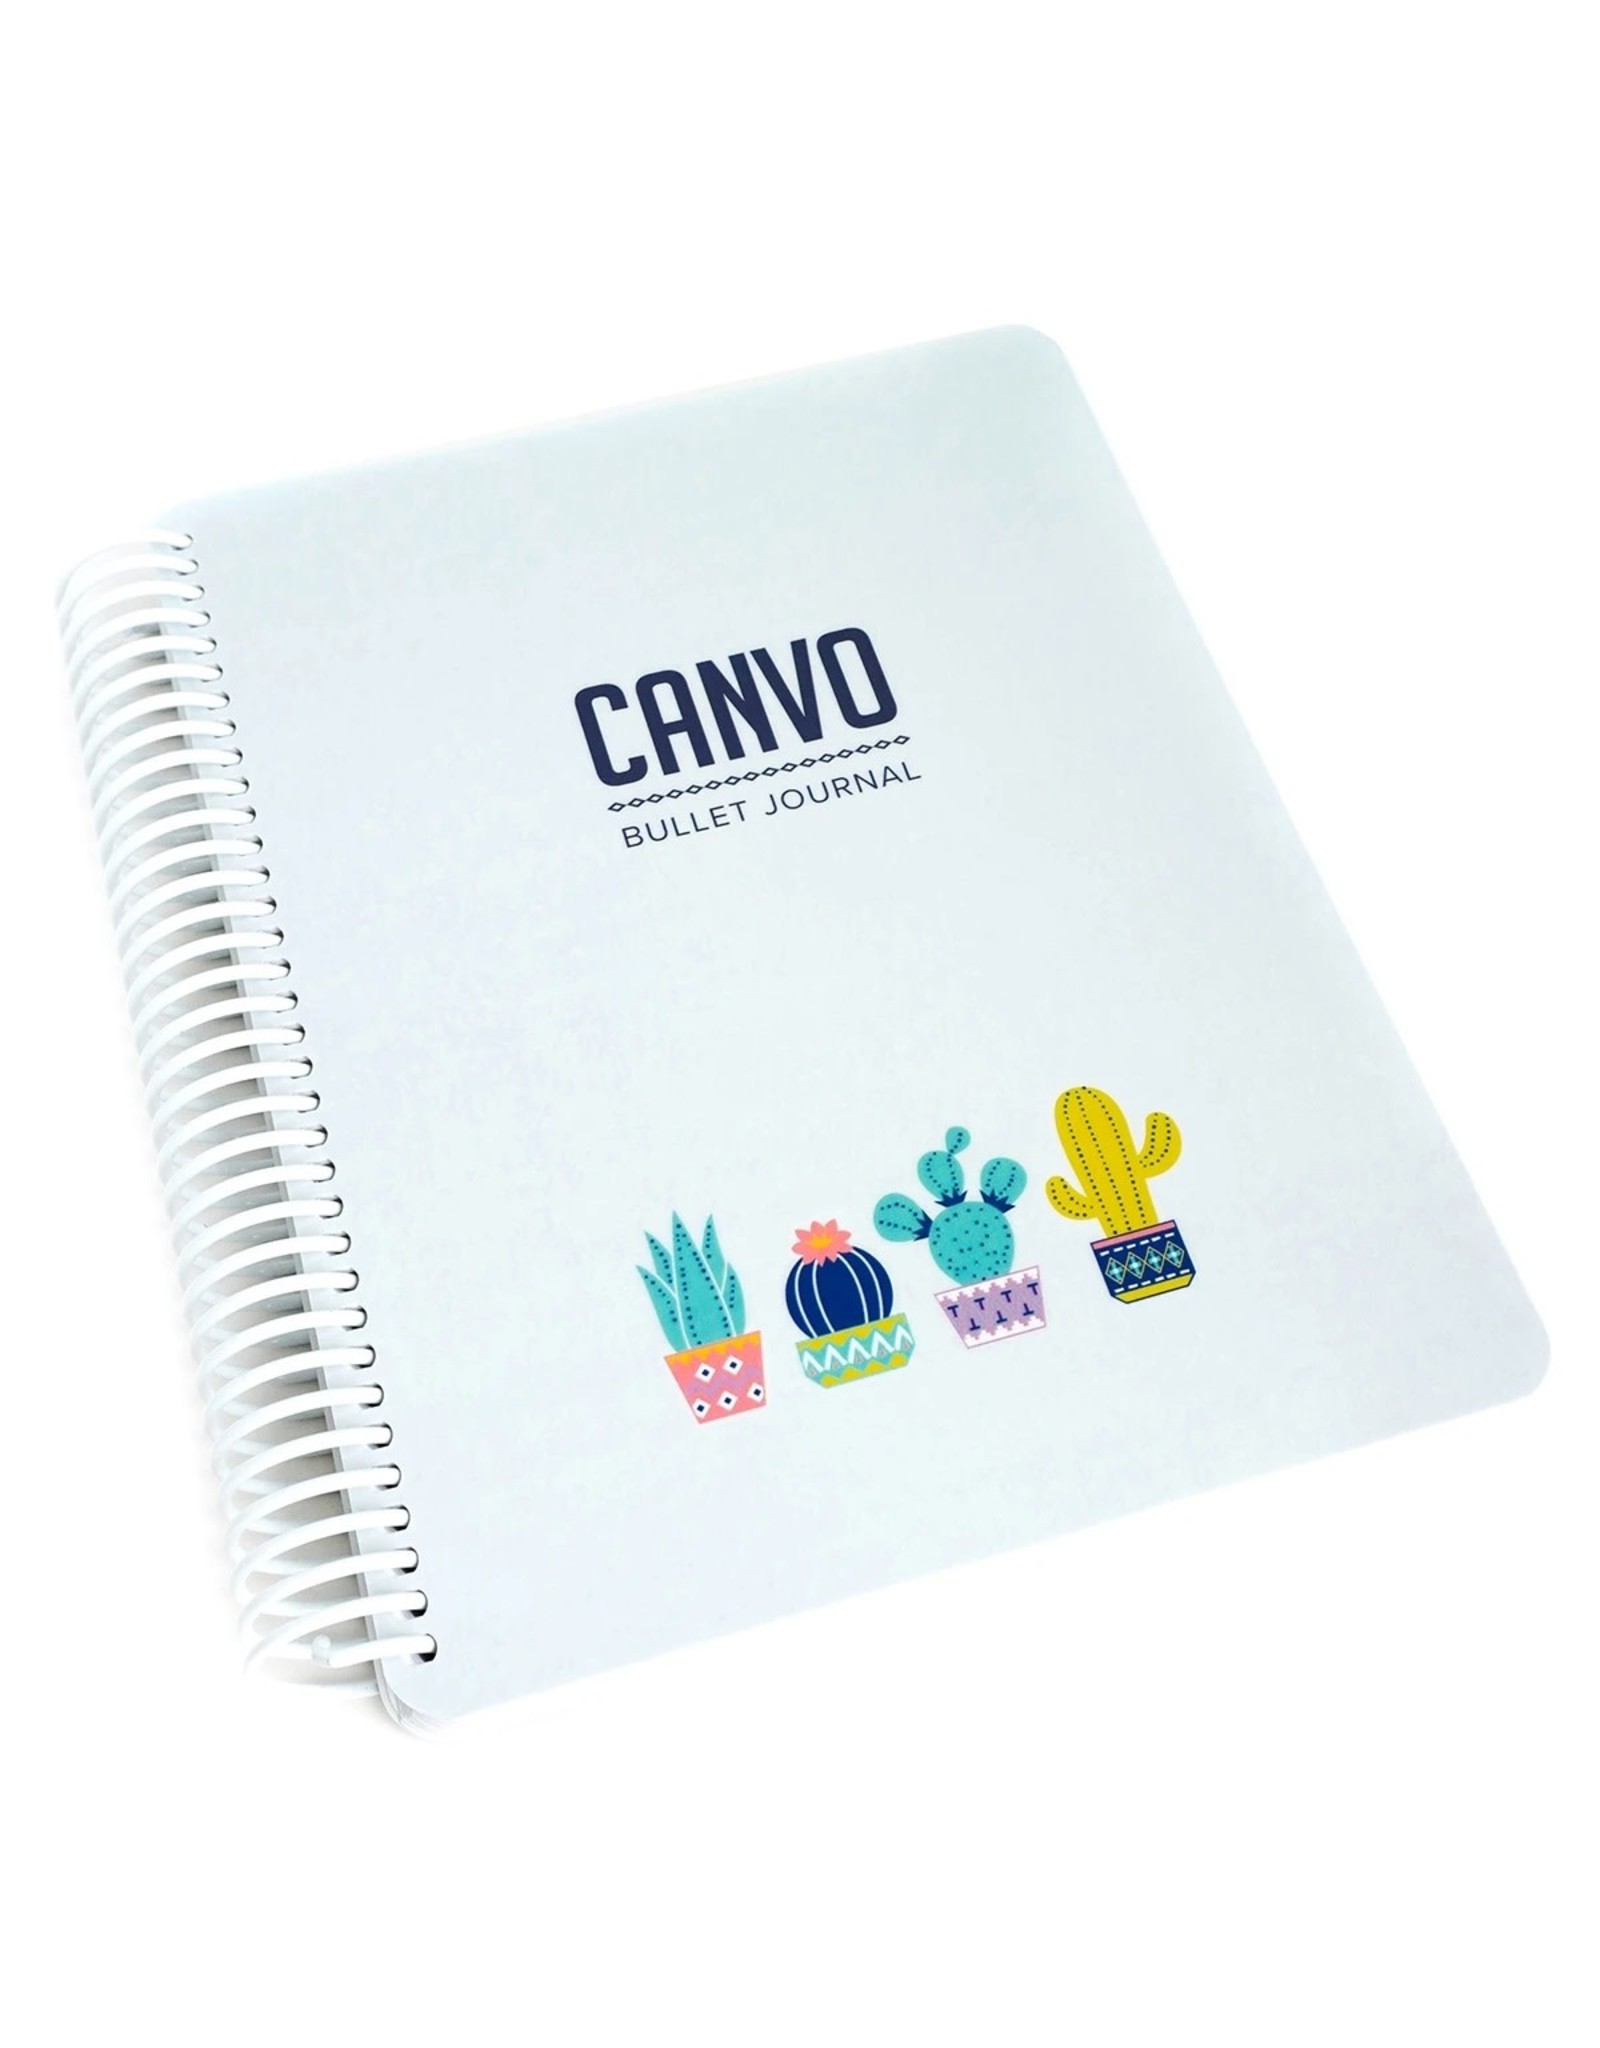 Catherine Pooler Designs Out West Canvo Journal